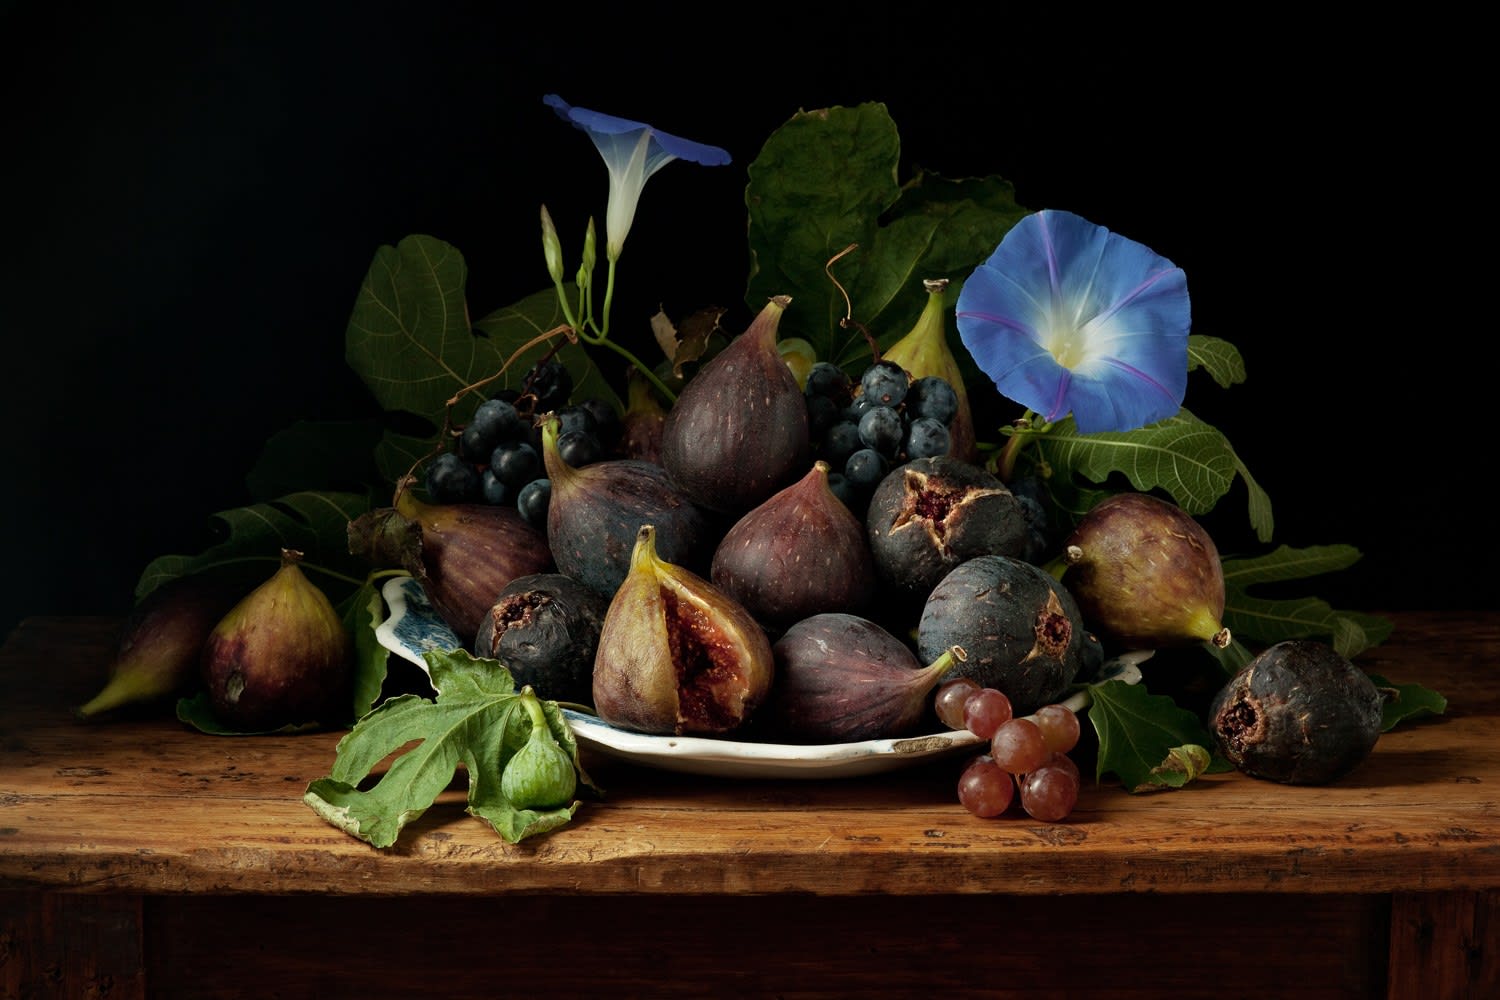 Paulette Tavormina, Figs and Morning Glories, After G.G., 2010